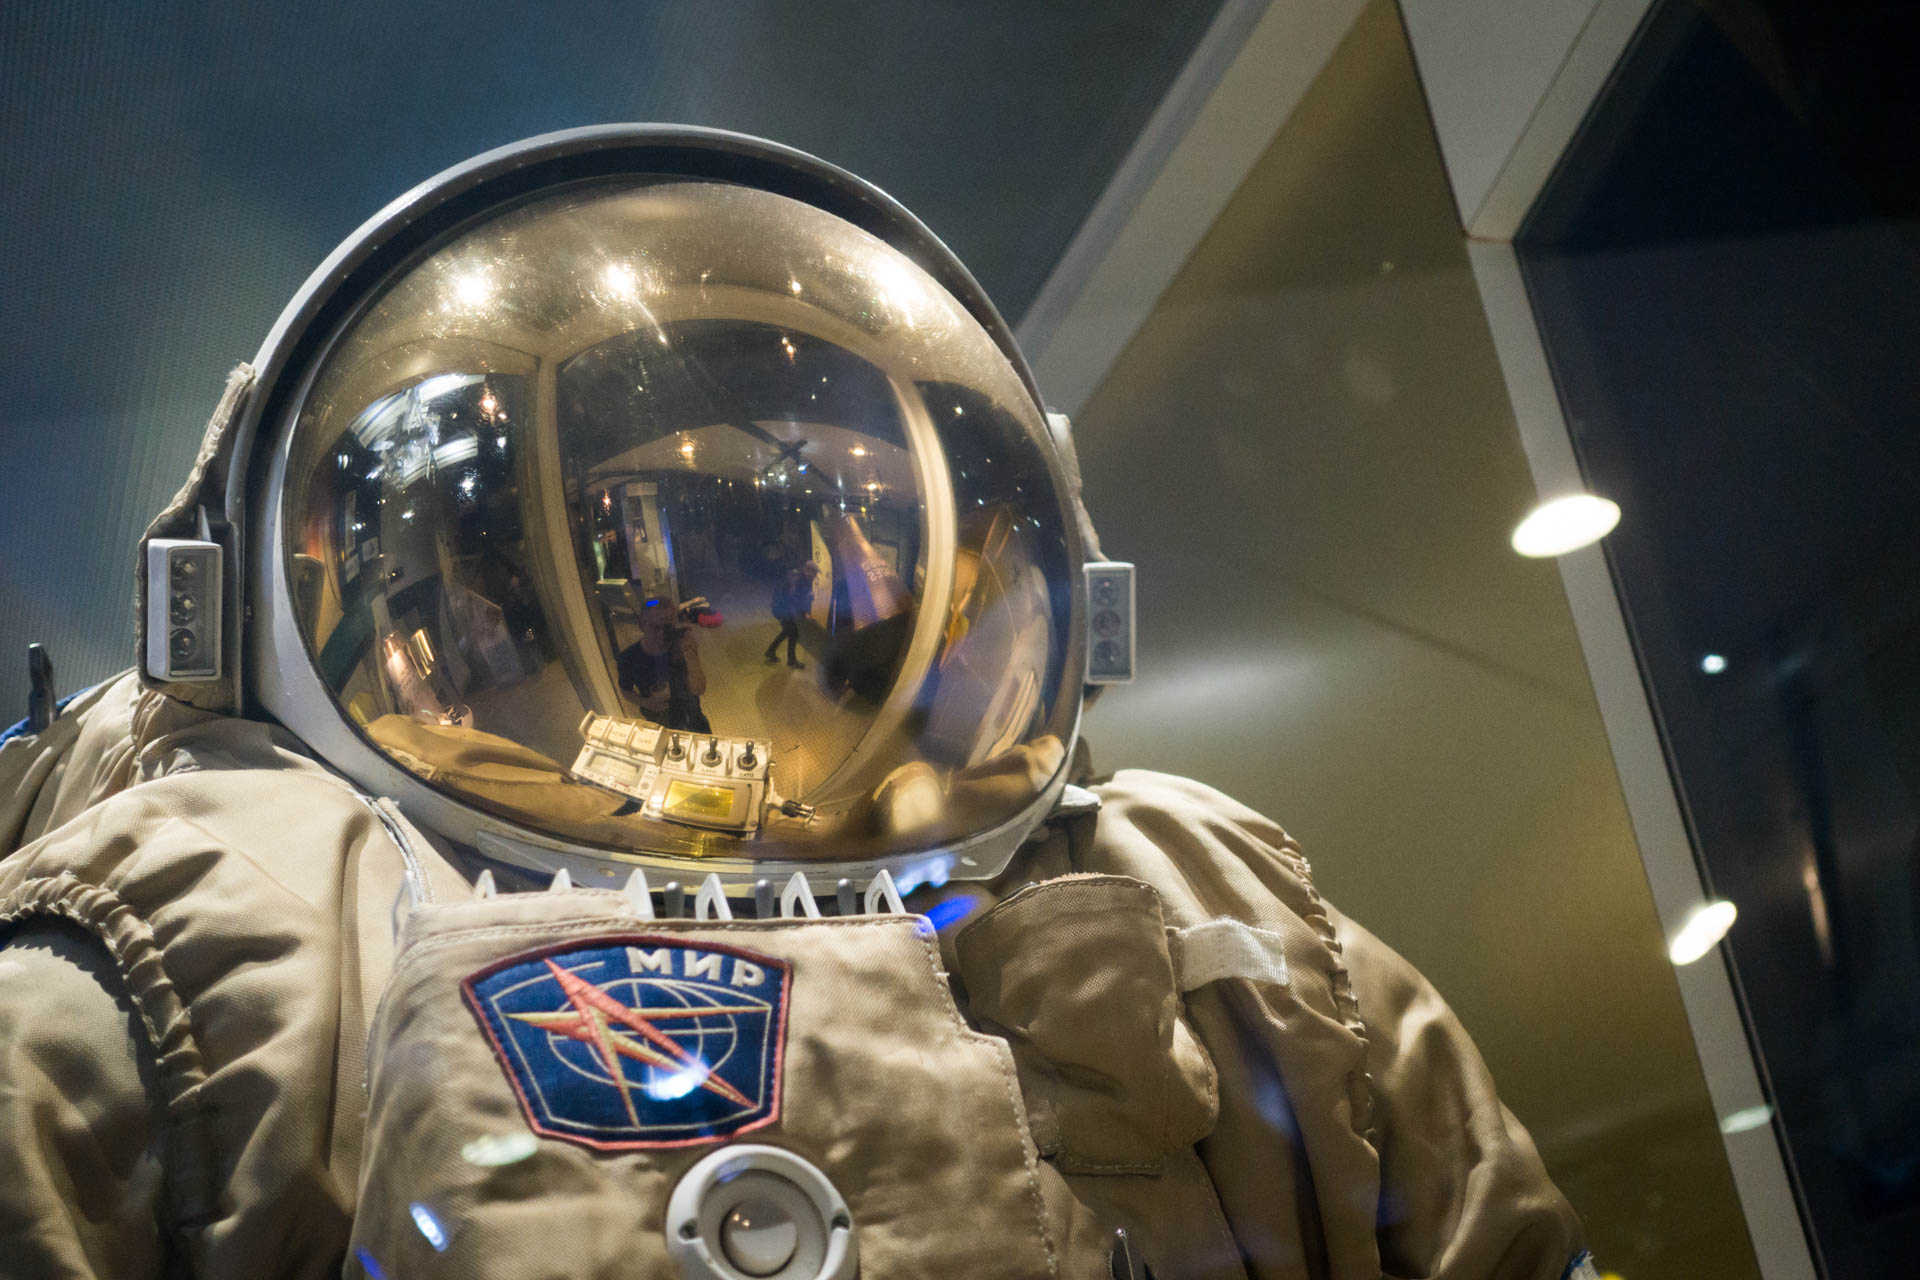 an astronaut costume from the movie, space force